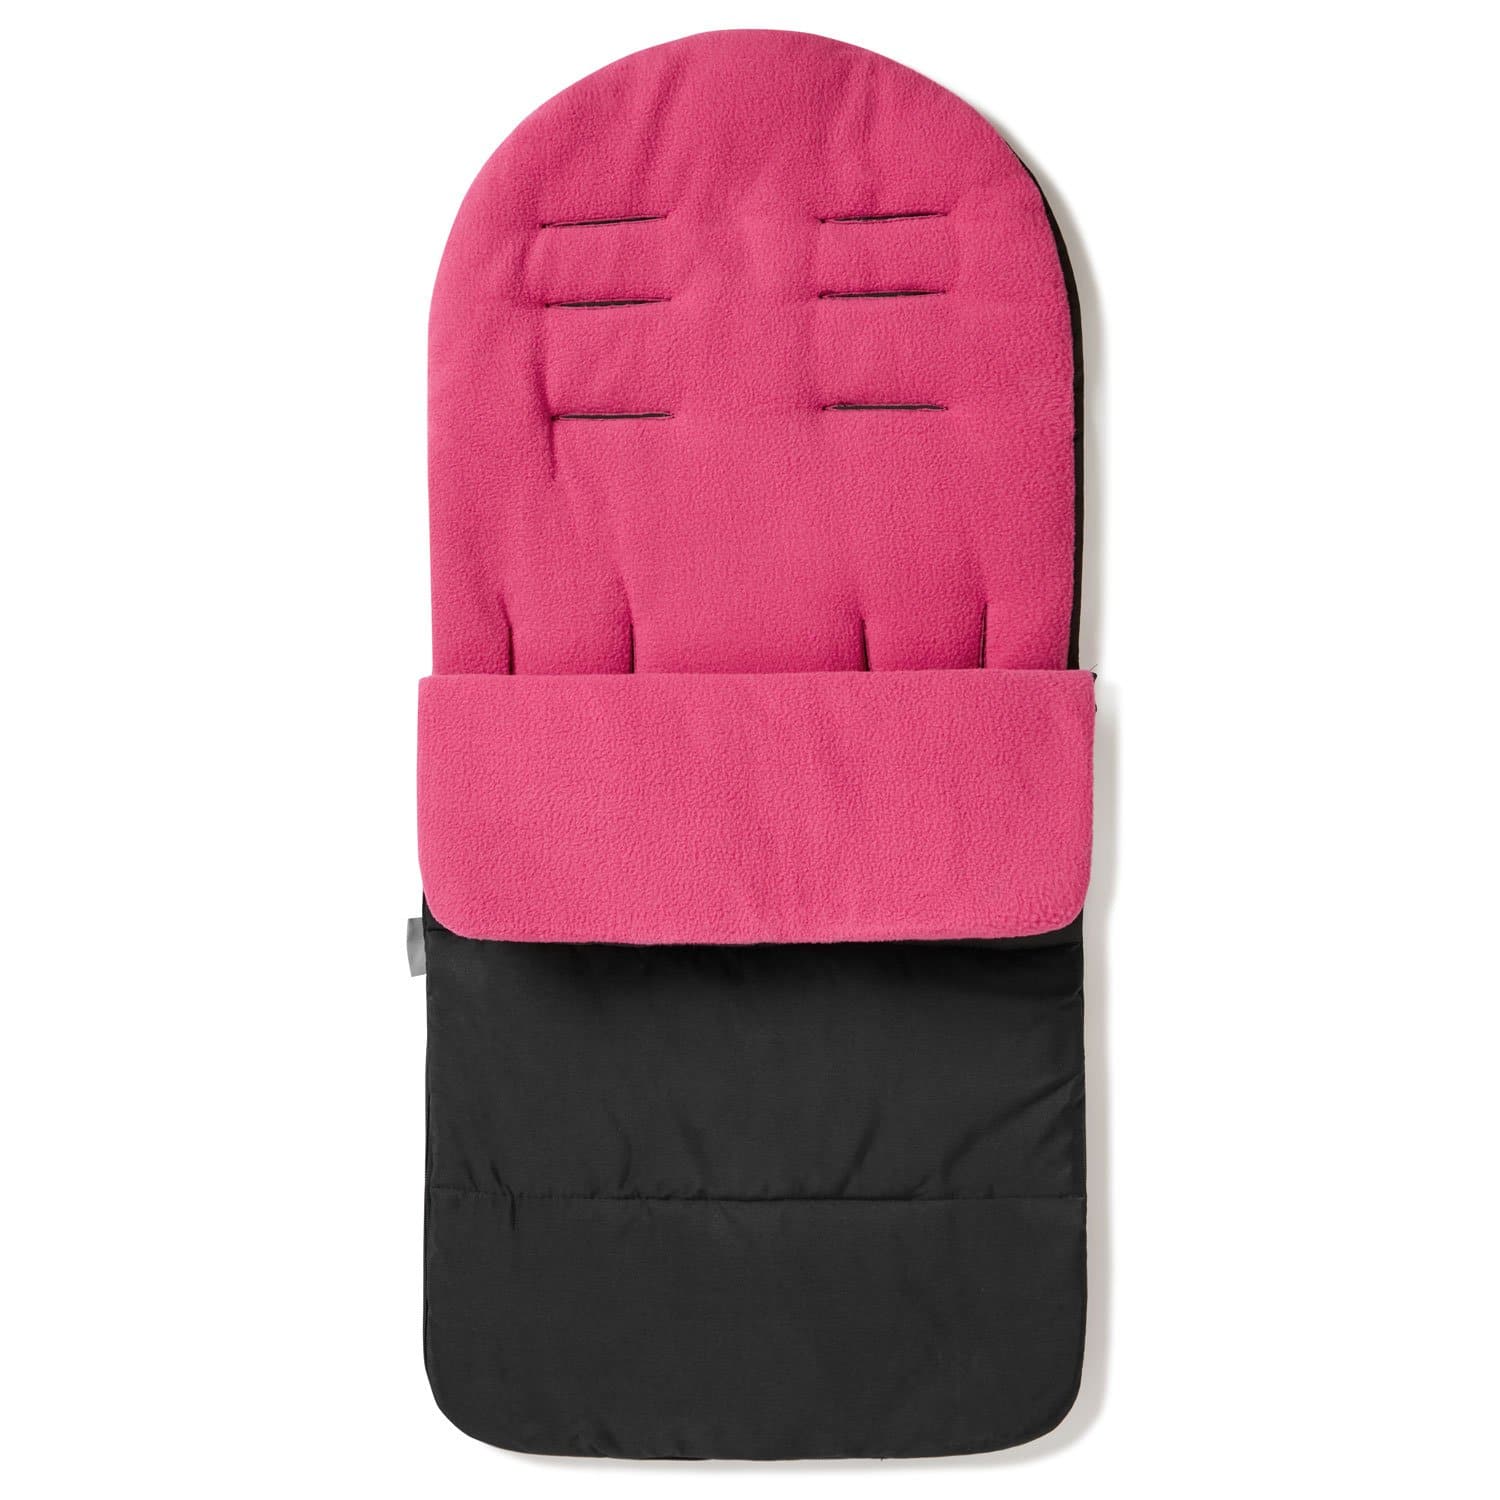 Premium Footmuff / Cosy Toes Compatible with iCandy - For Your Little One